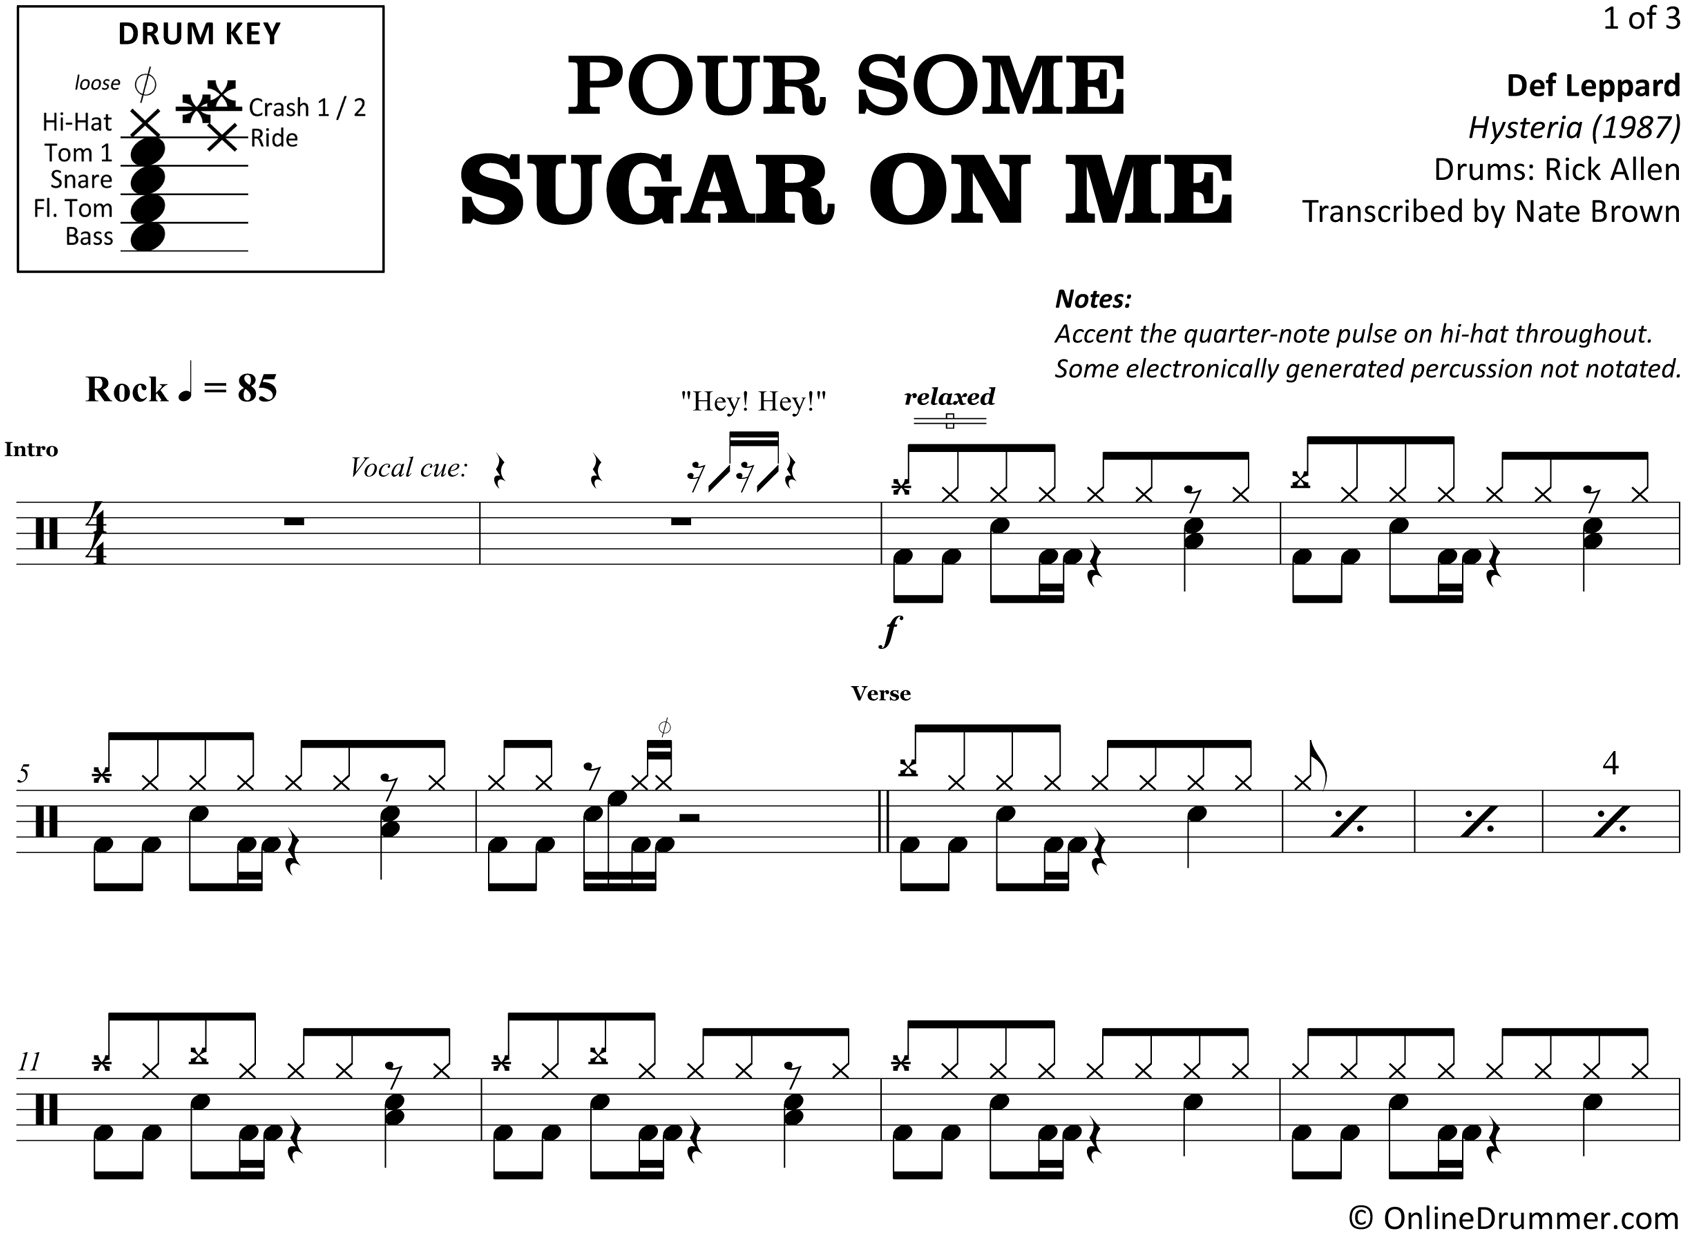 Pour Some Sugar on Me - Def Leppard - Drum Sheet Music